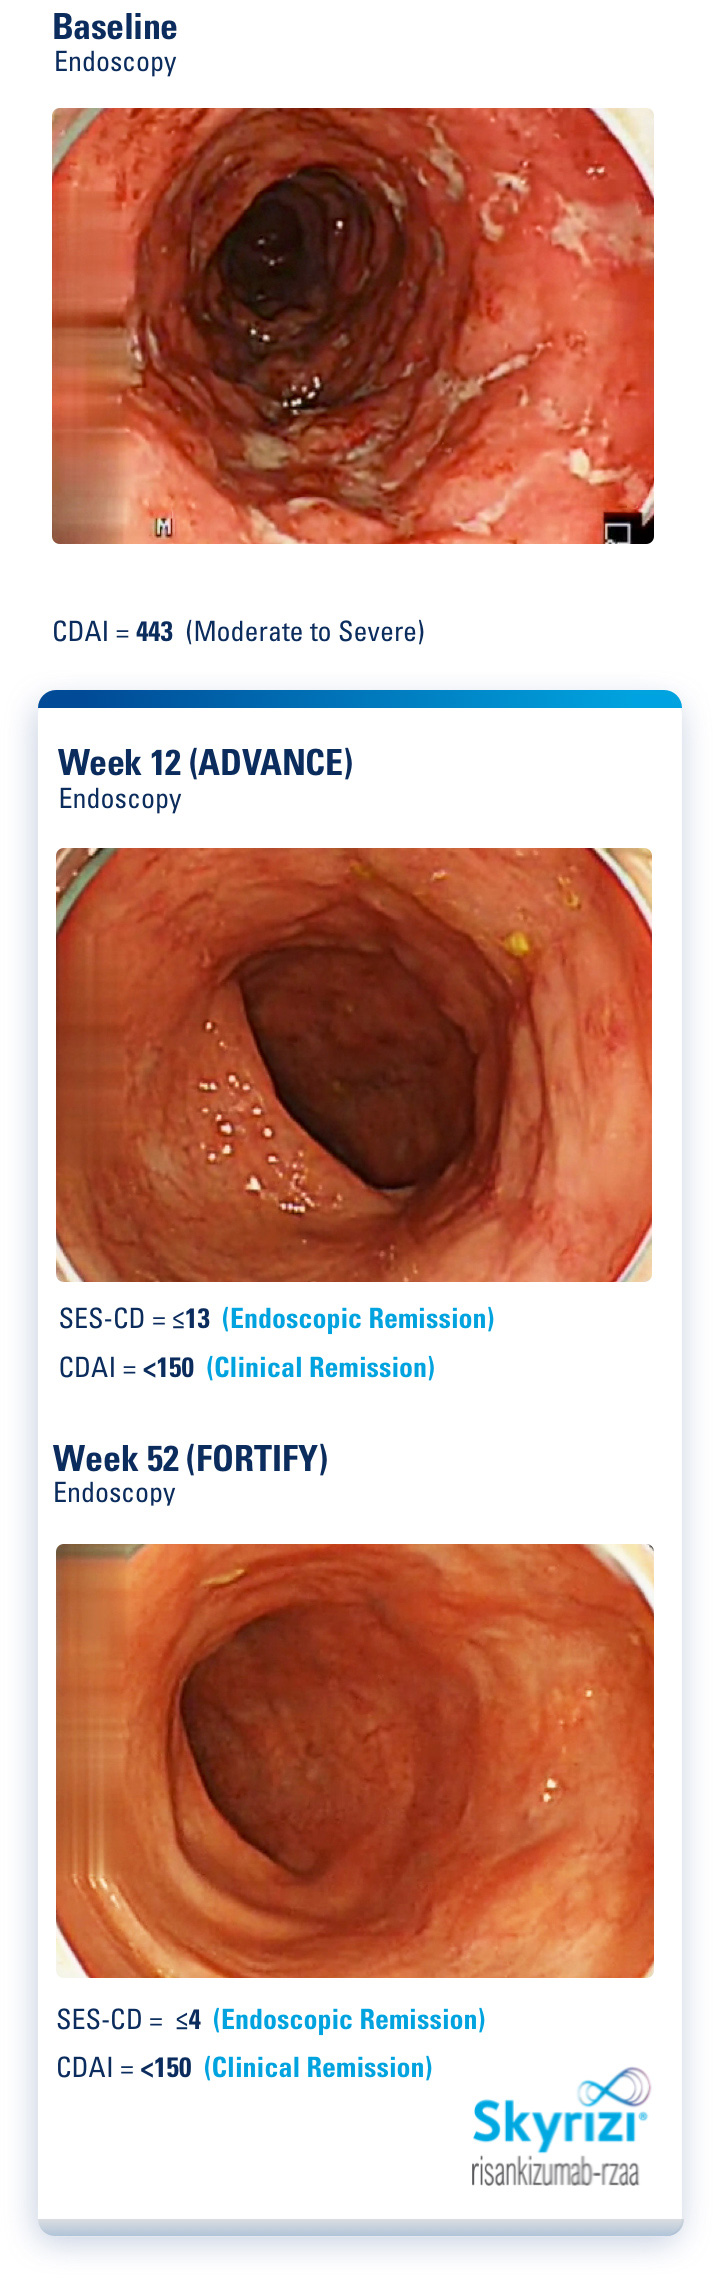 Endoscopy images of a clinical trial patient at baseline, Week 12 and Week 52